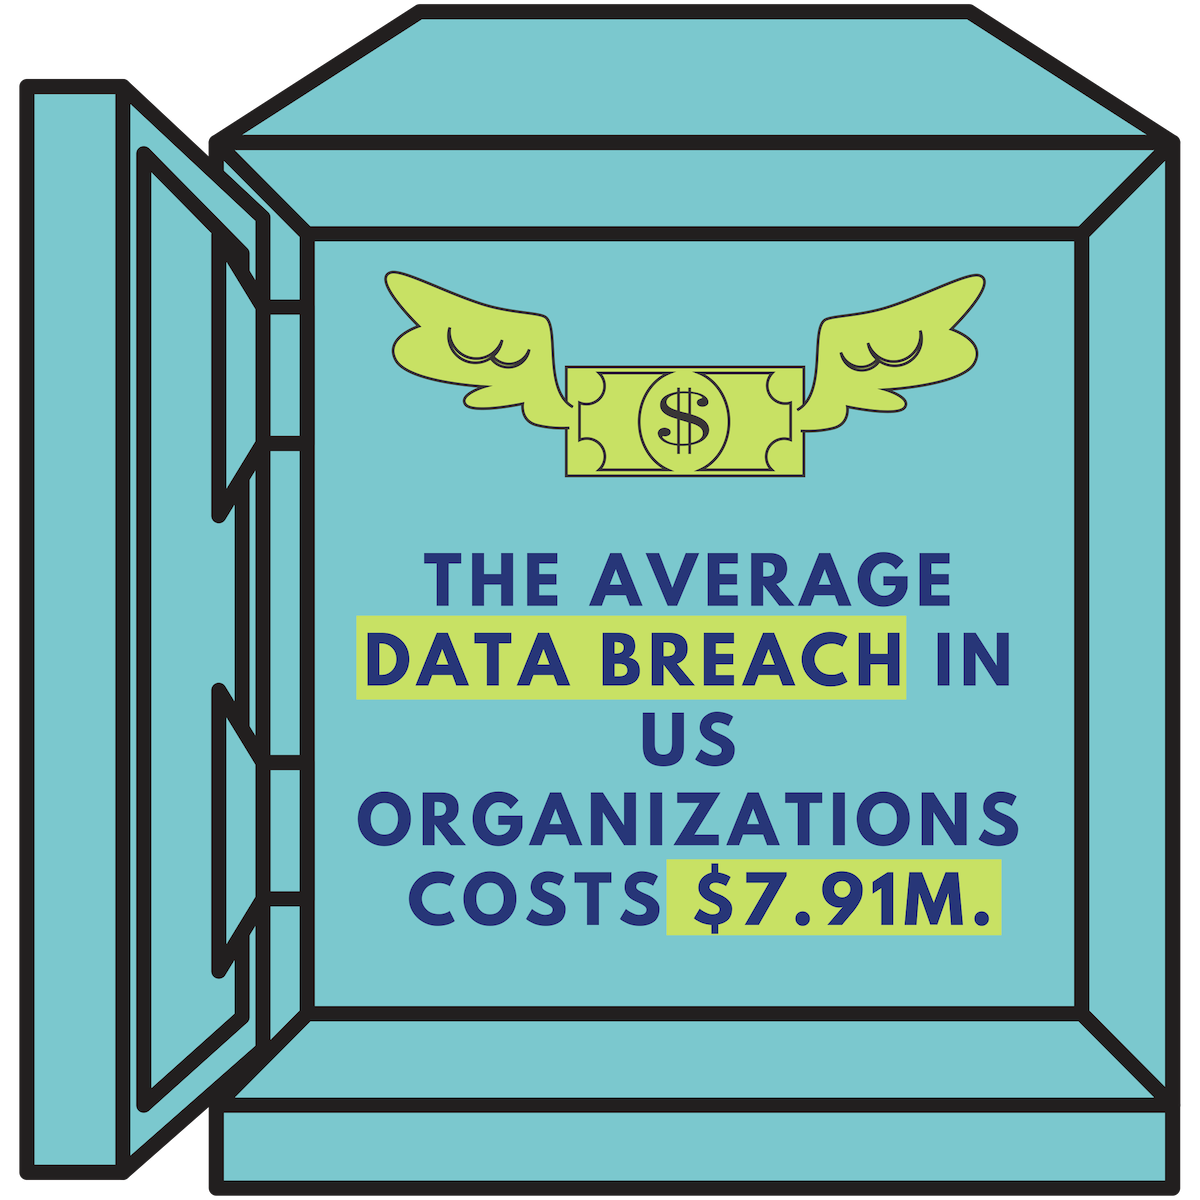 The average data breach in US organizations costs $7.91M